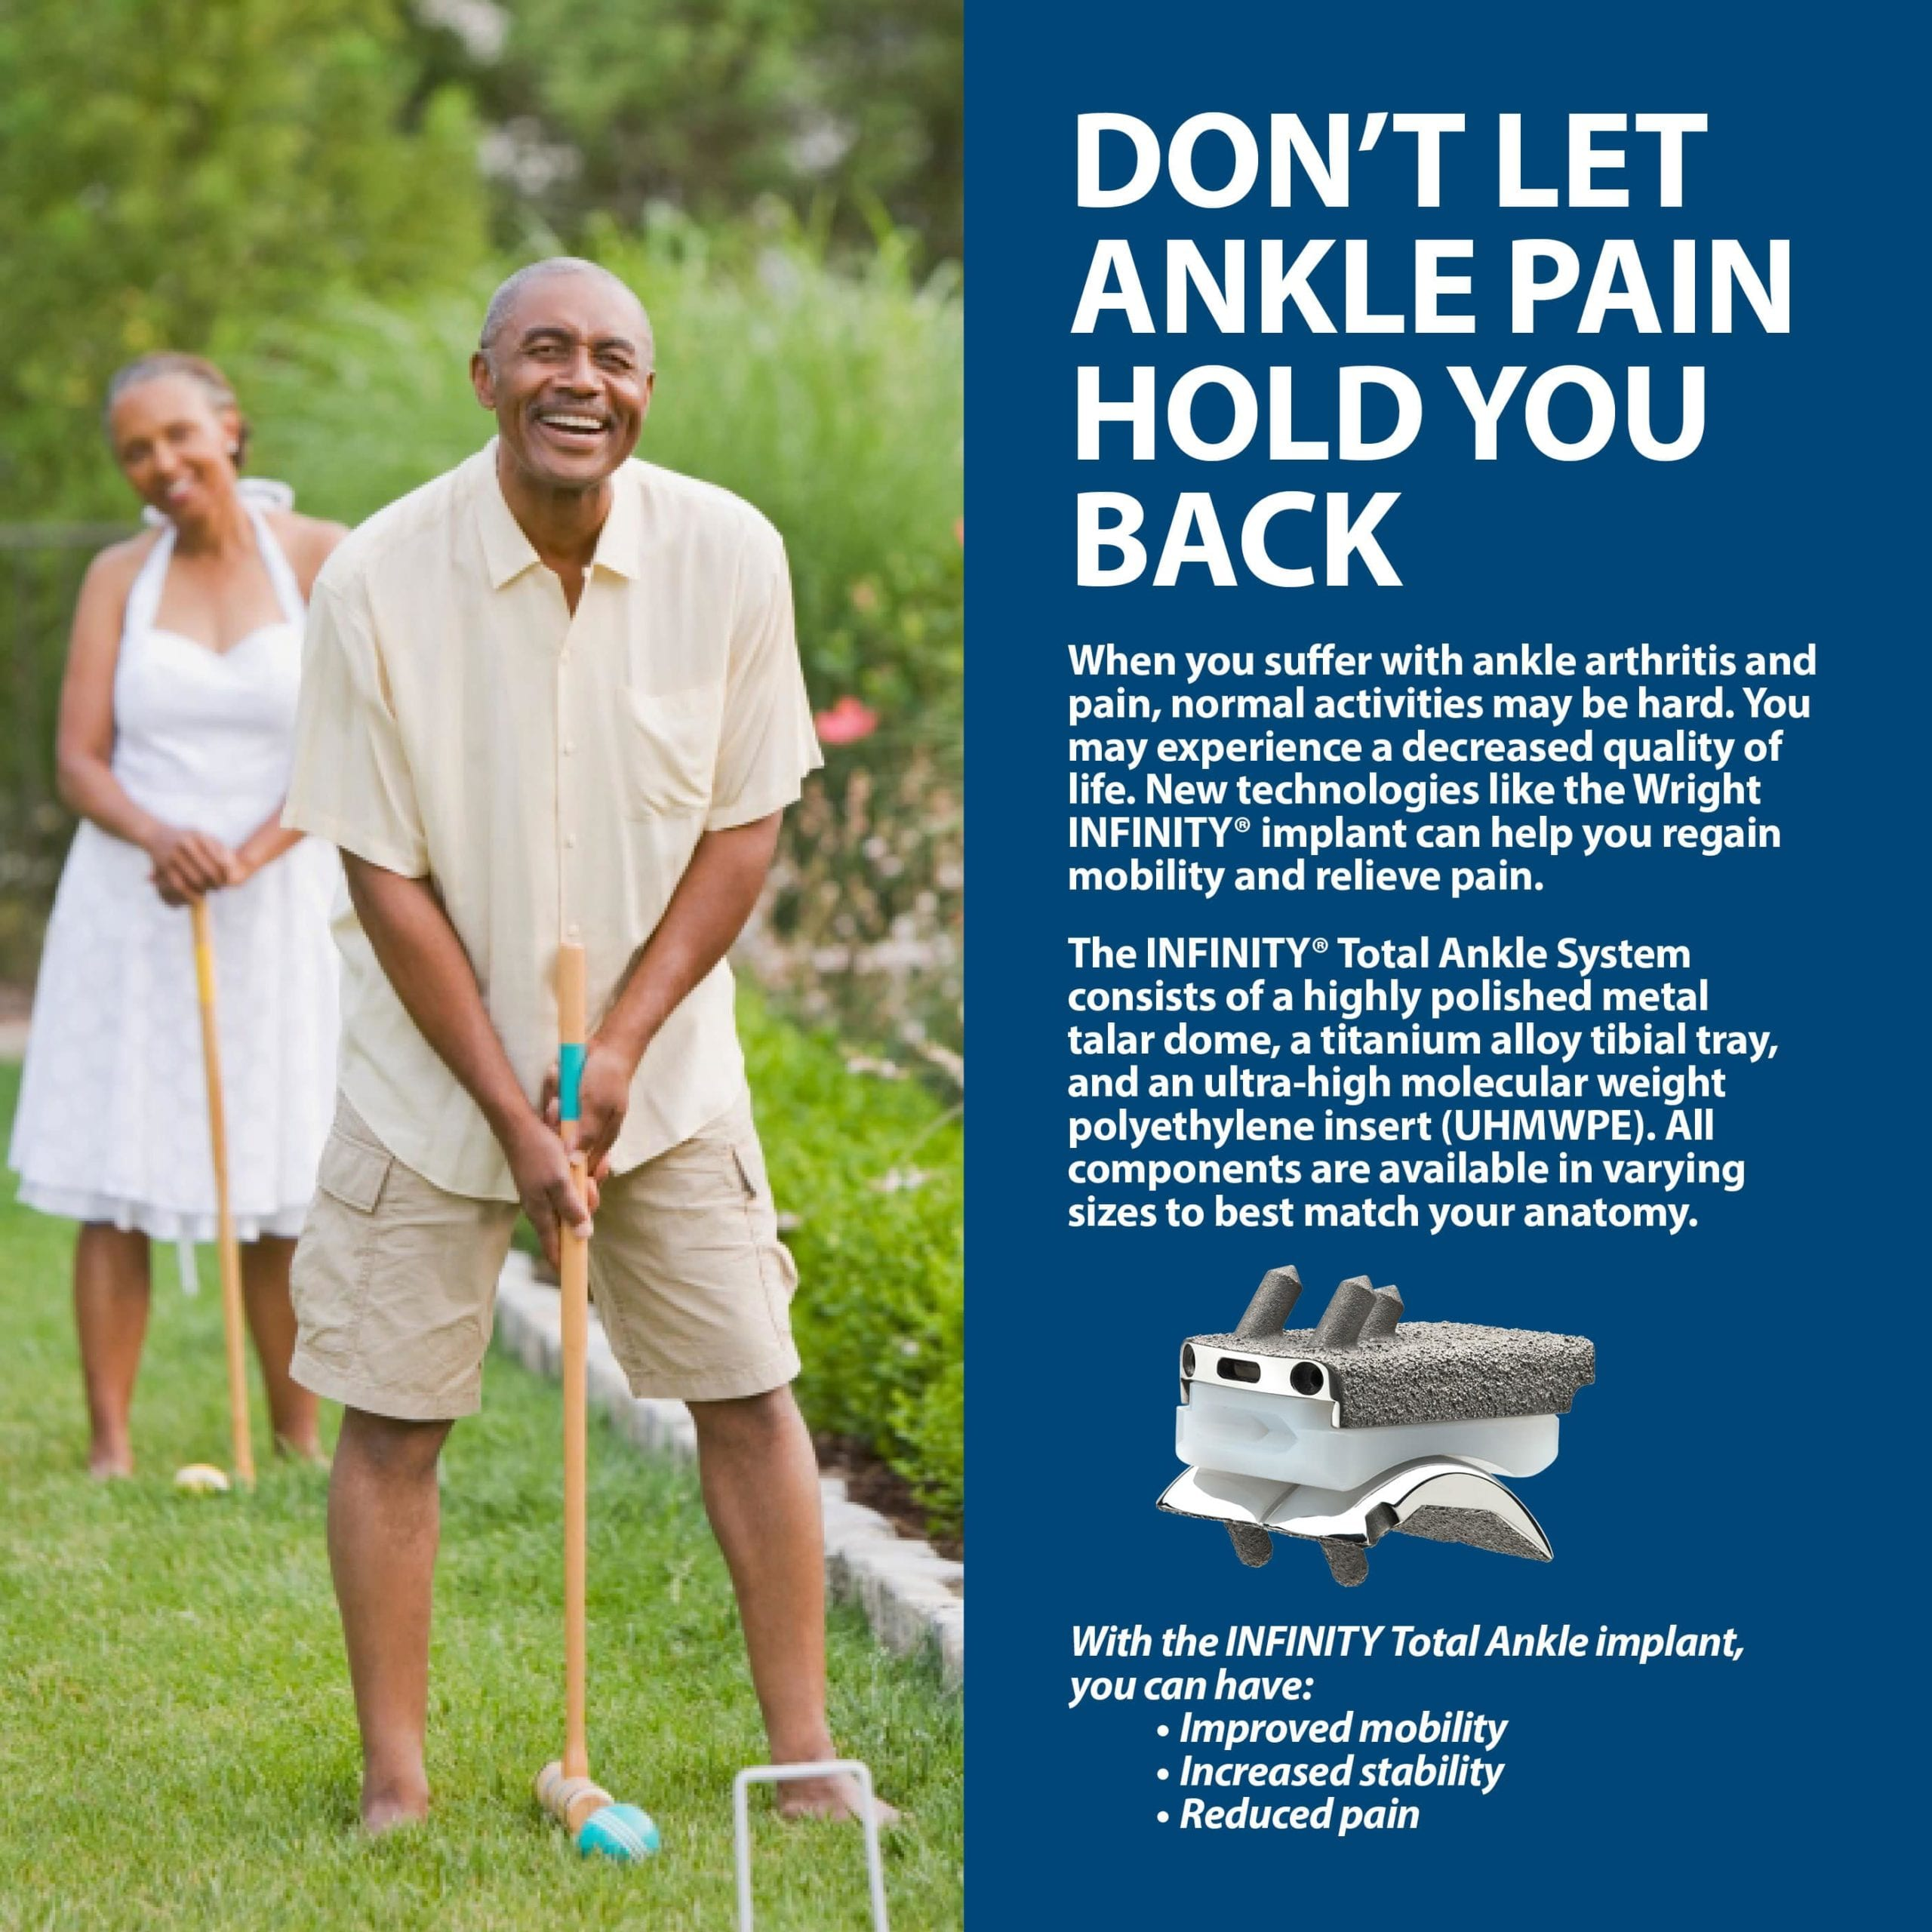 Infinity total ankle replacement helps the arthritic ankle by increasing mobility and stability and decreasing pain